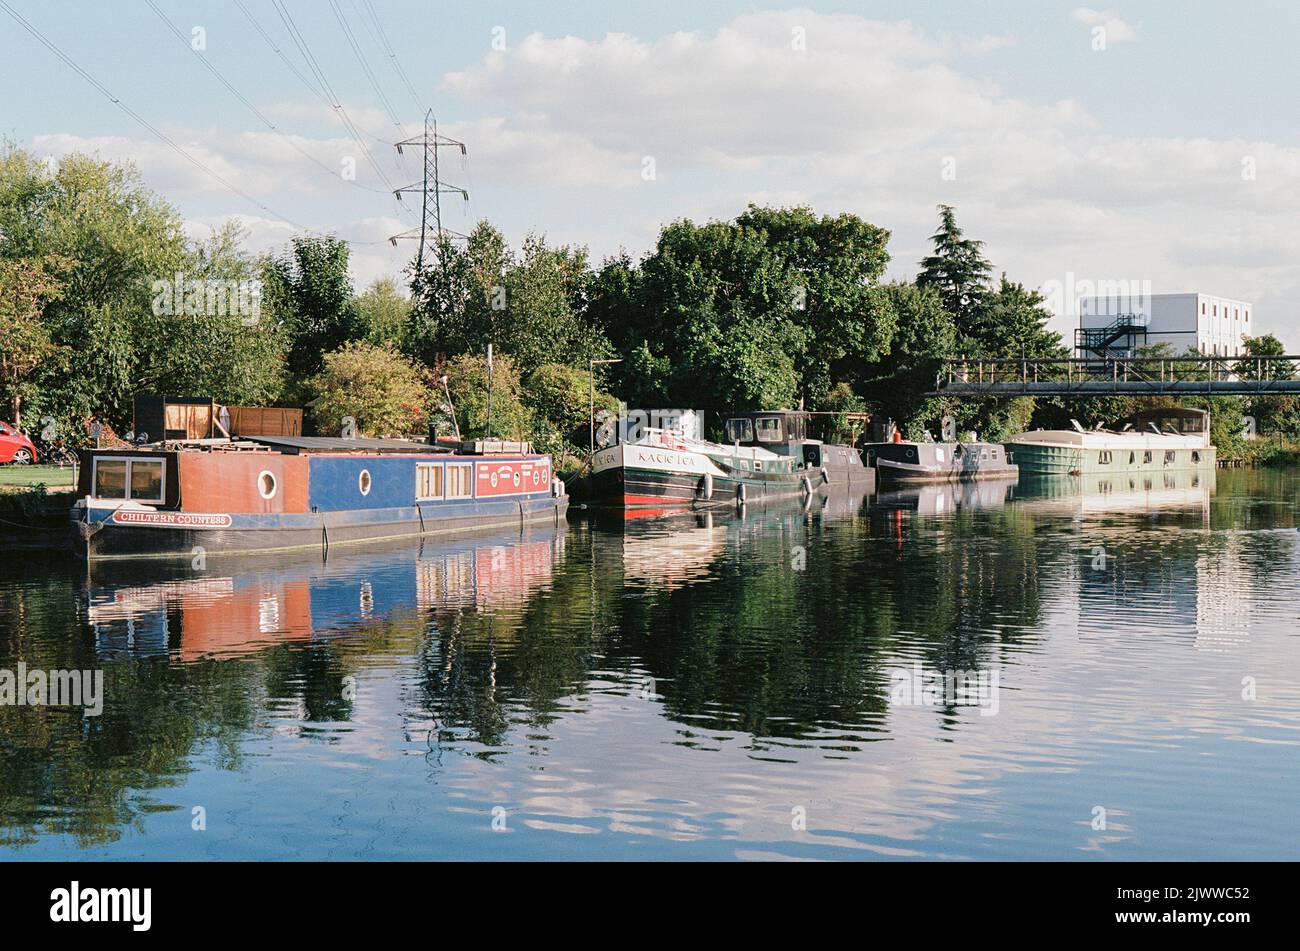 Narrowboats on the River Lea at Tottenham Marshes, North London UK, in late summer Stock Photo